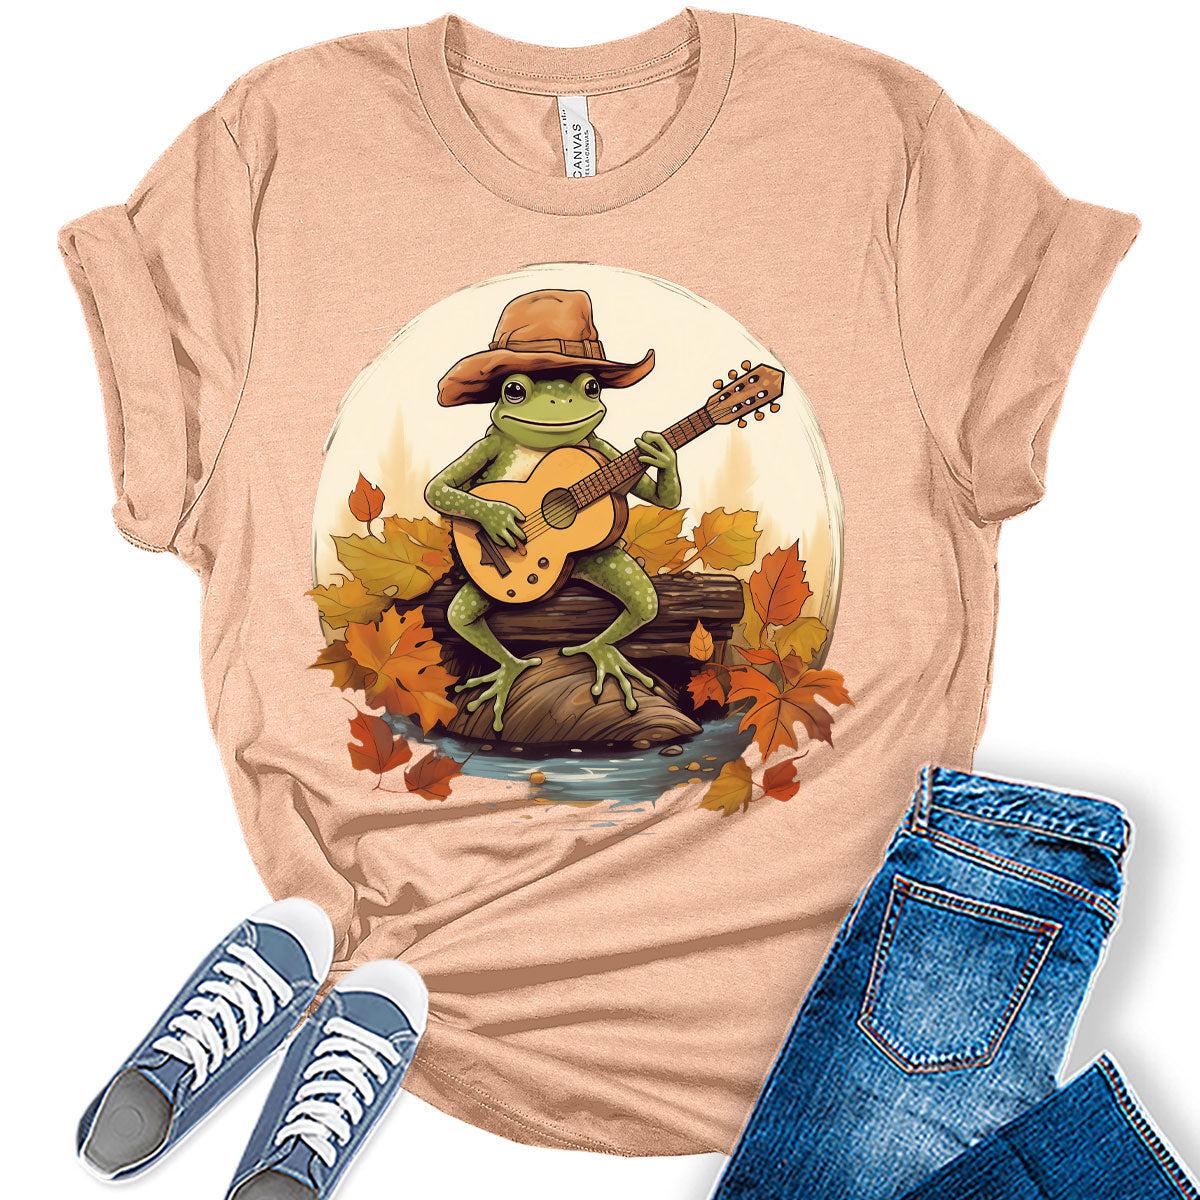 Womens Fall Tops Frog Vintage Aesthetic Tshirt Cottagecore Girls Graphic Tee Halloween Shirts